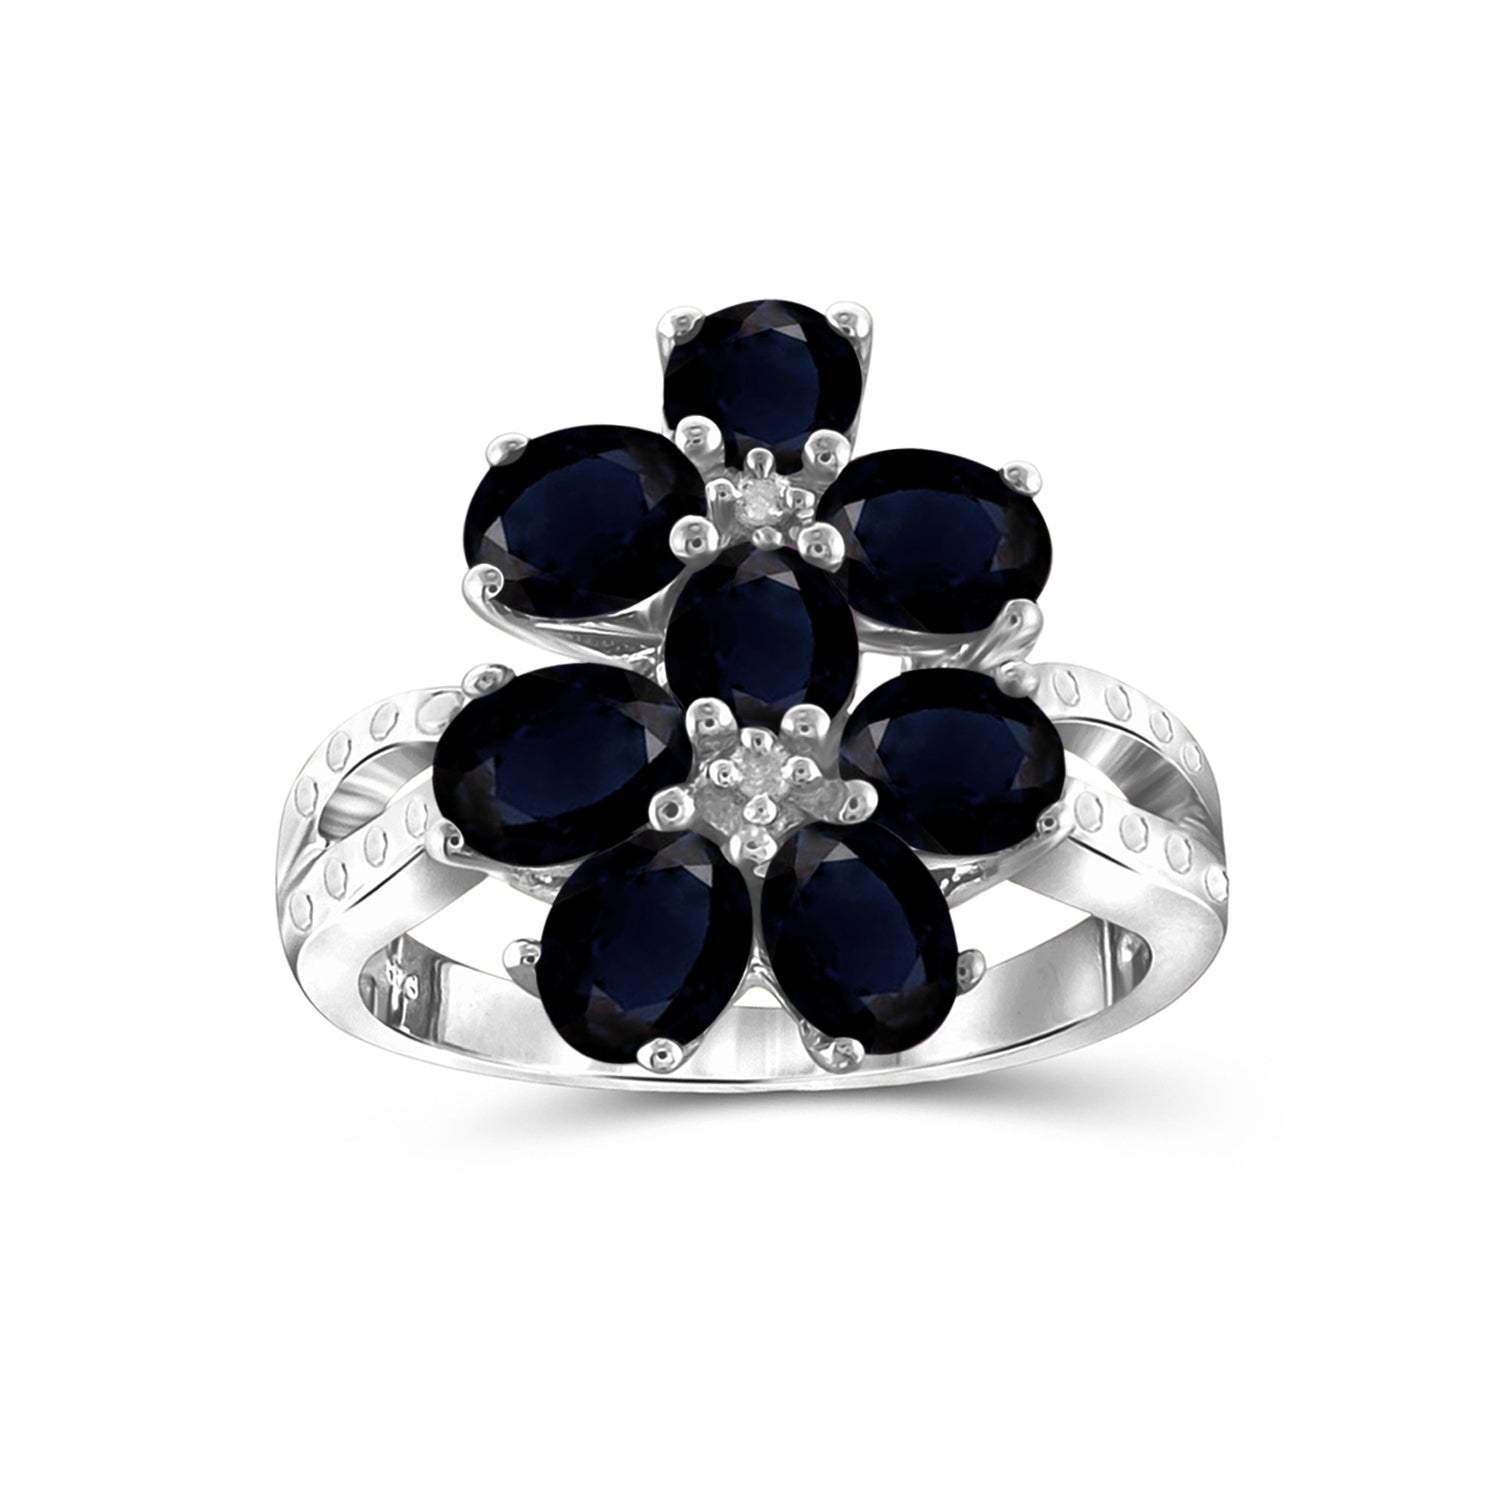 2 1/2 Carat T.G.W. Sapphire And White Diamond Accent Sterling Silver Ring